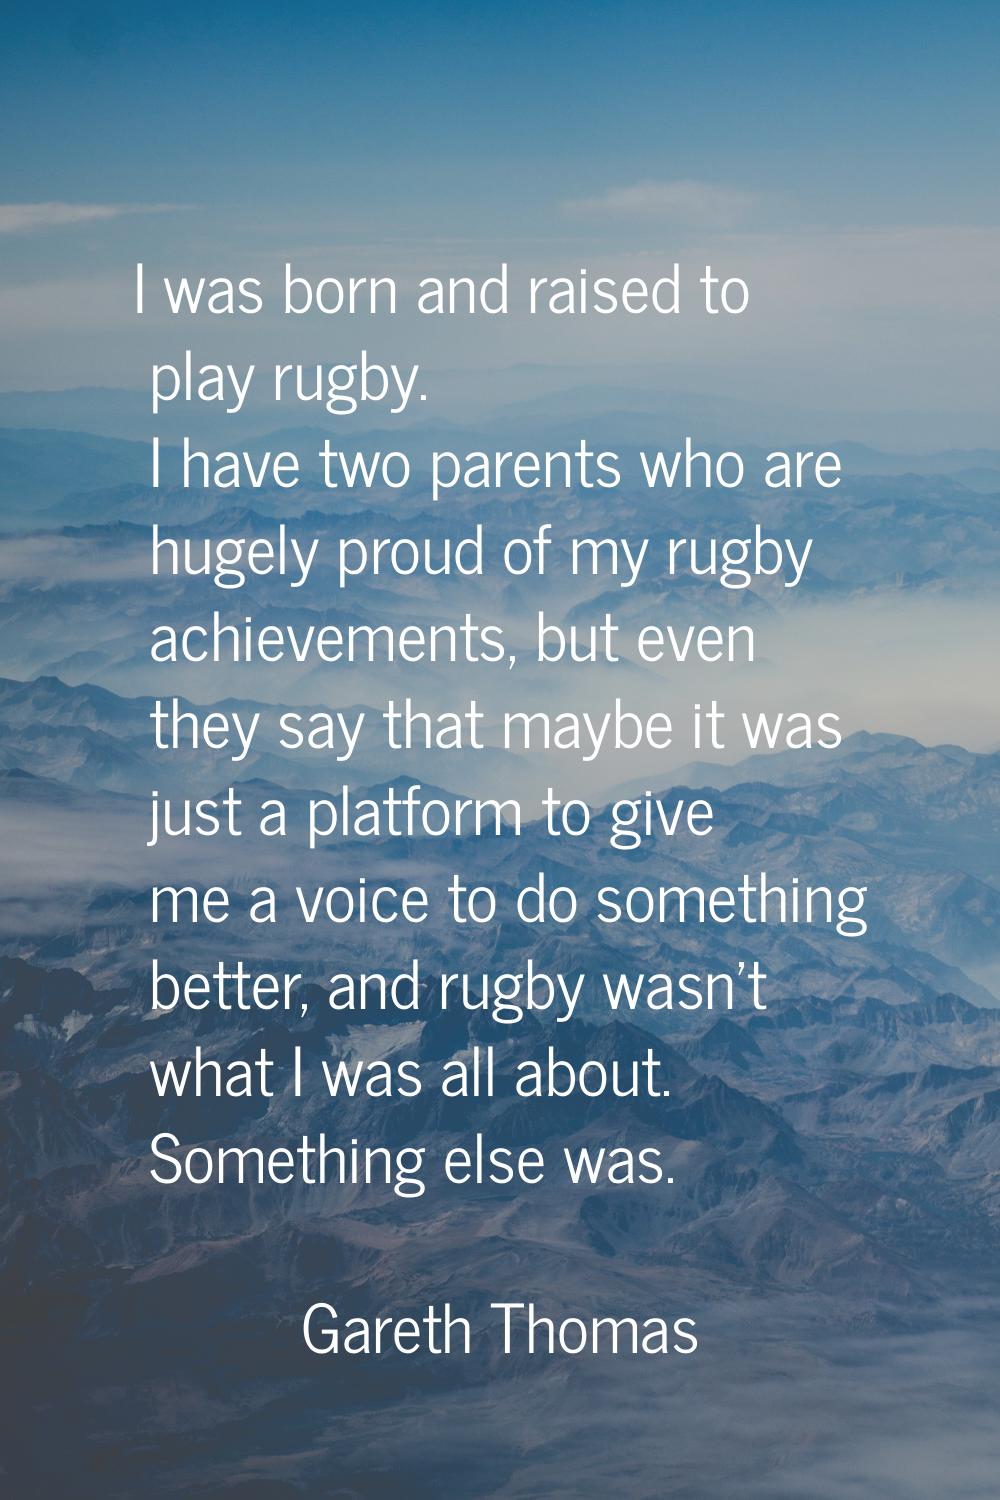 I was born and raised to play rugby. I have two parents who are hugely proud of my rugby achievemen